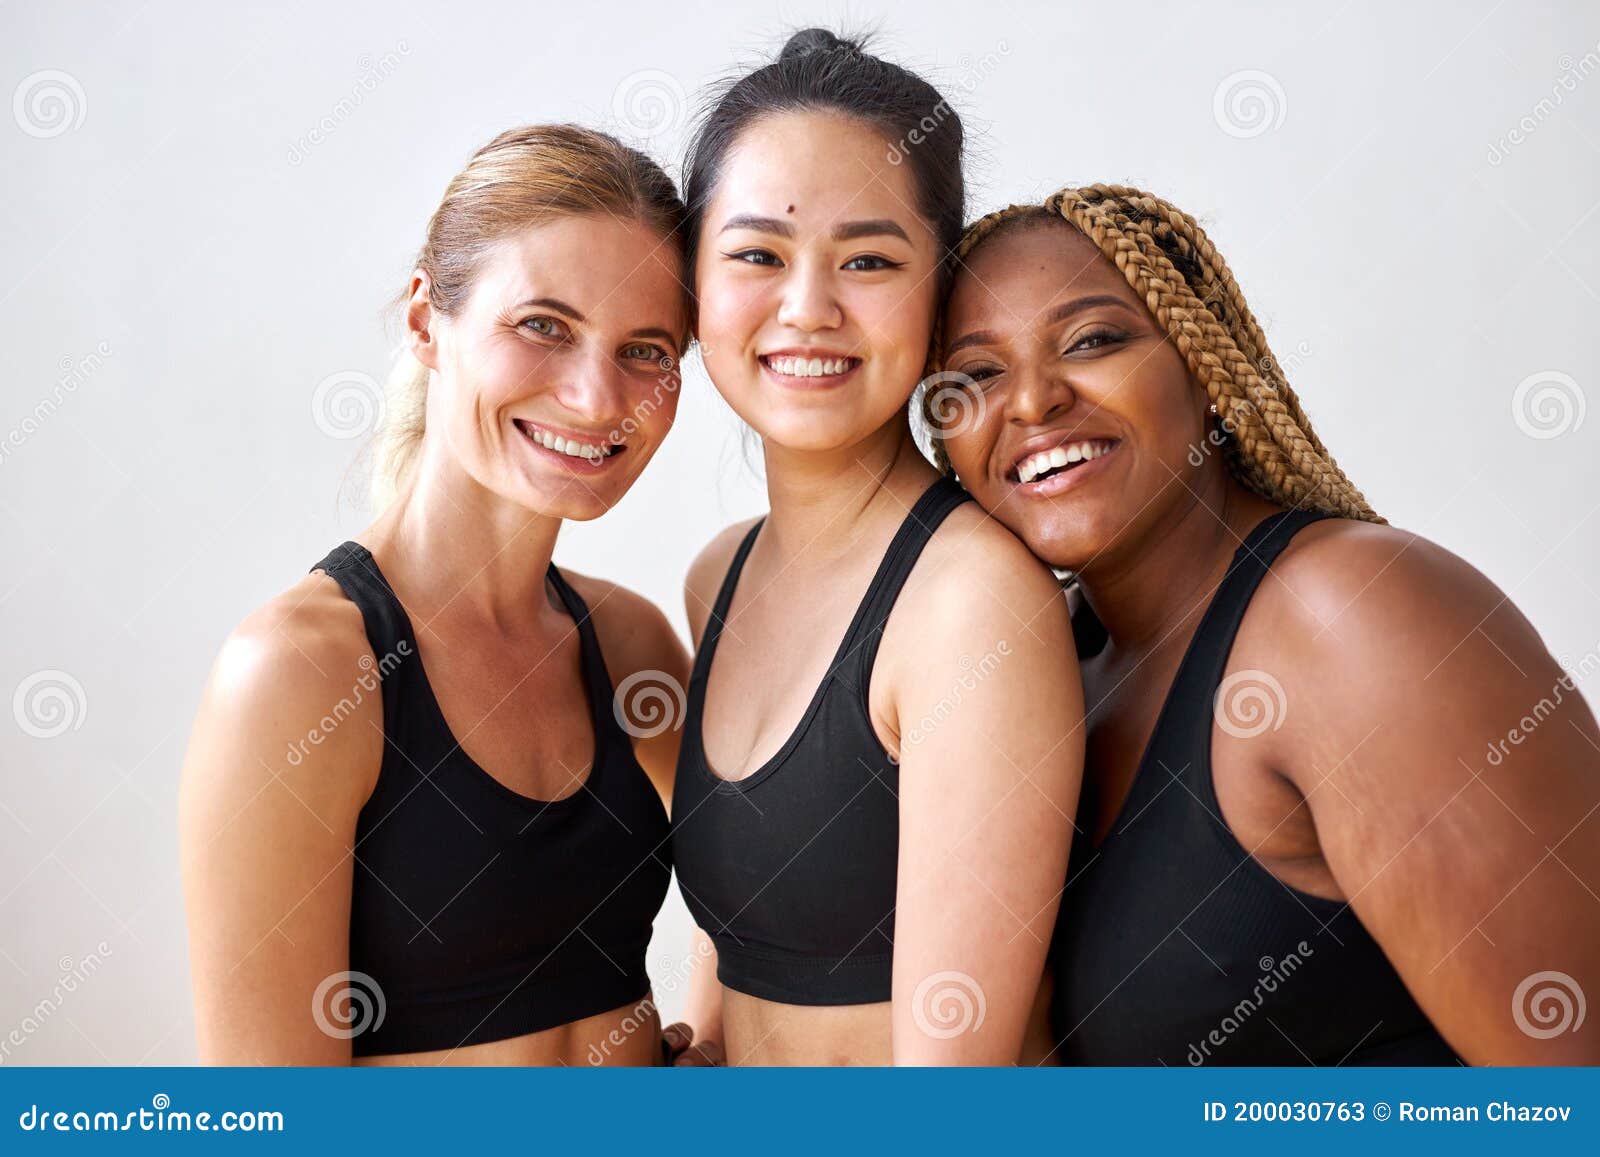 three young multi ethnic female models of different race, hair colour and body size posing at camera